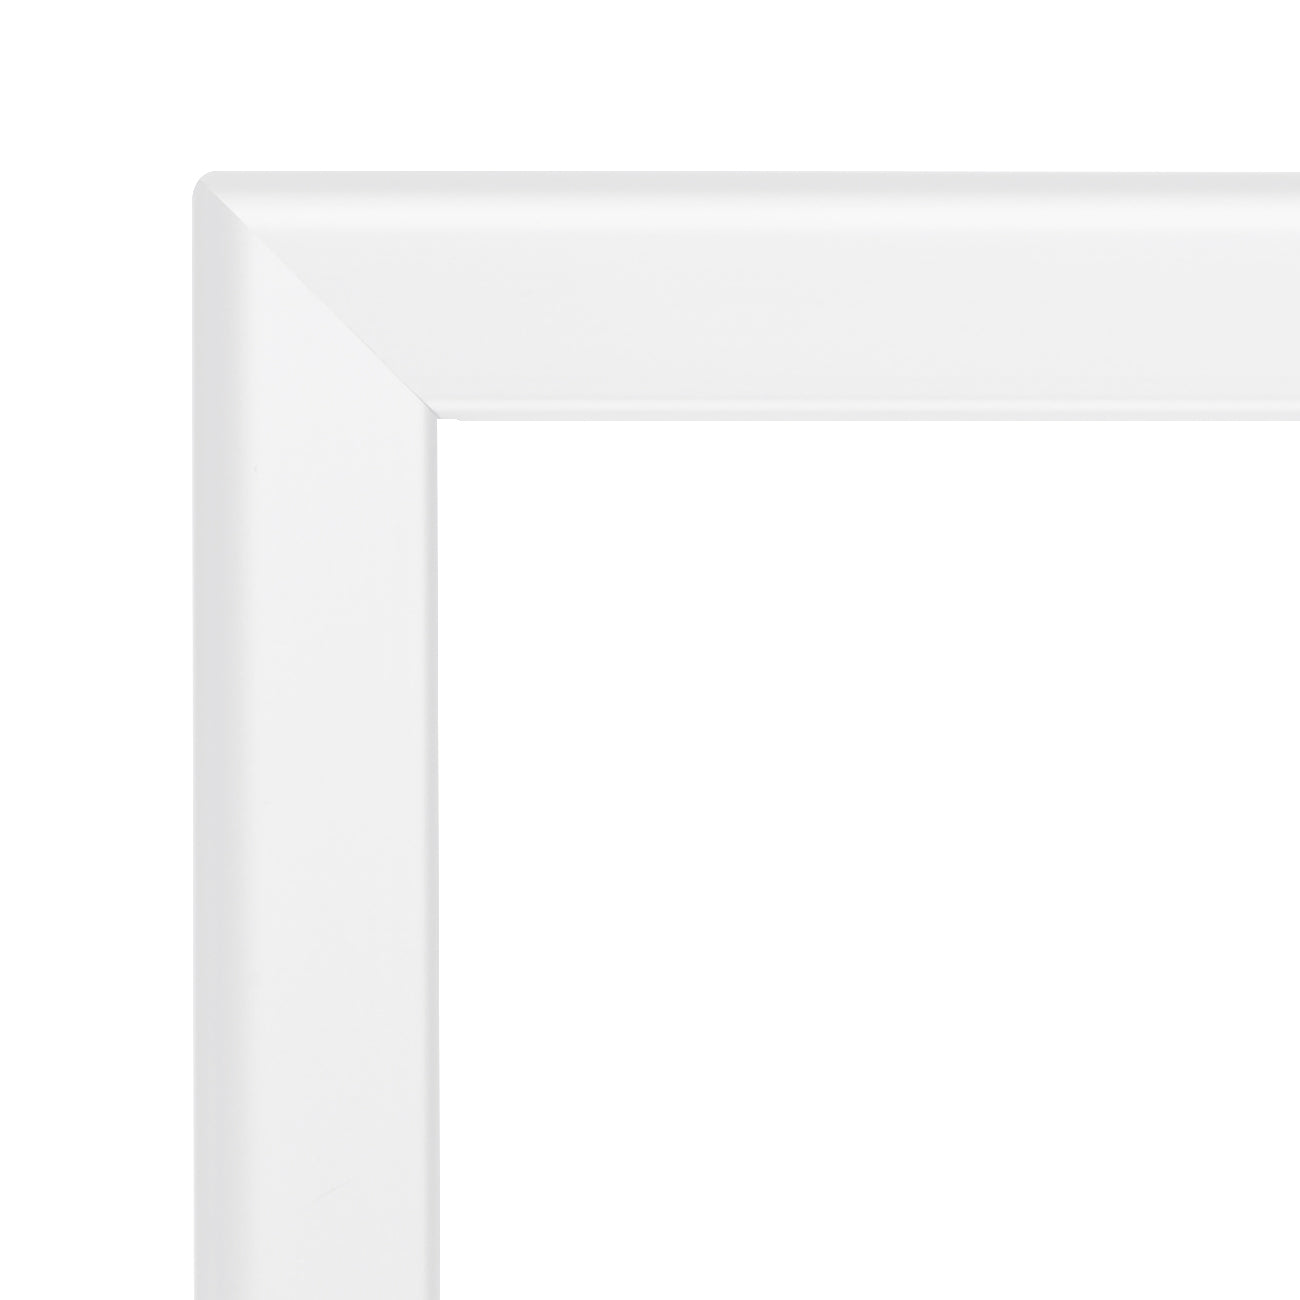 Load image into Gallery viewer, 36x48 White SnapeZo® Snap Frame - 1.25&amp;quot; Profile
